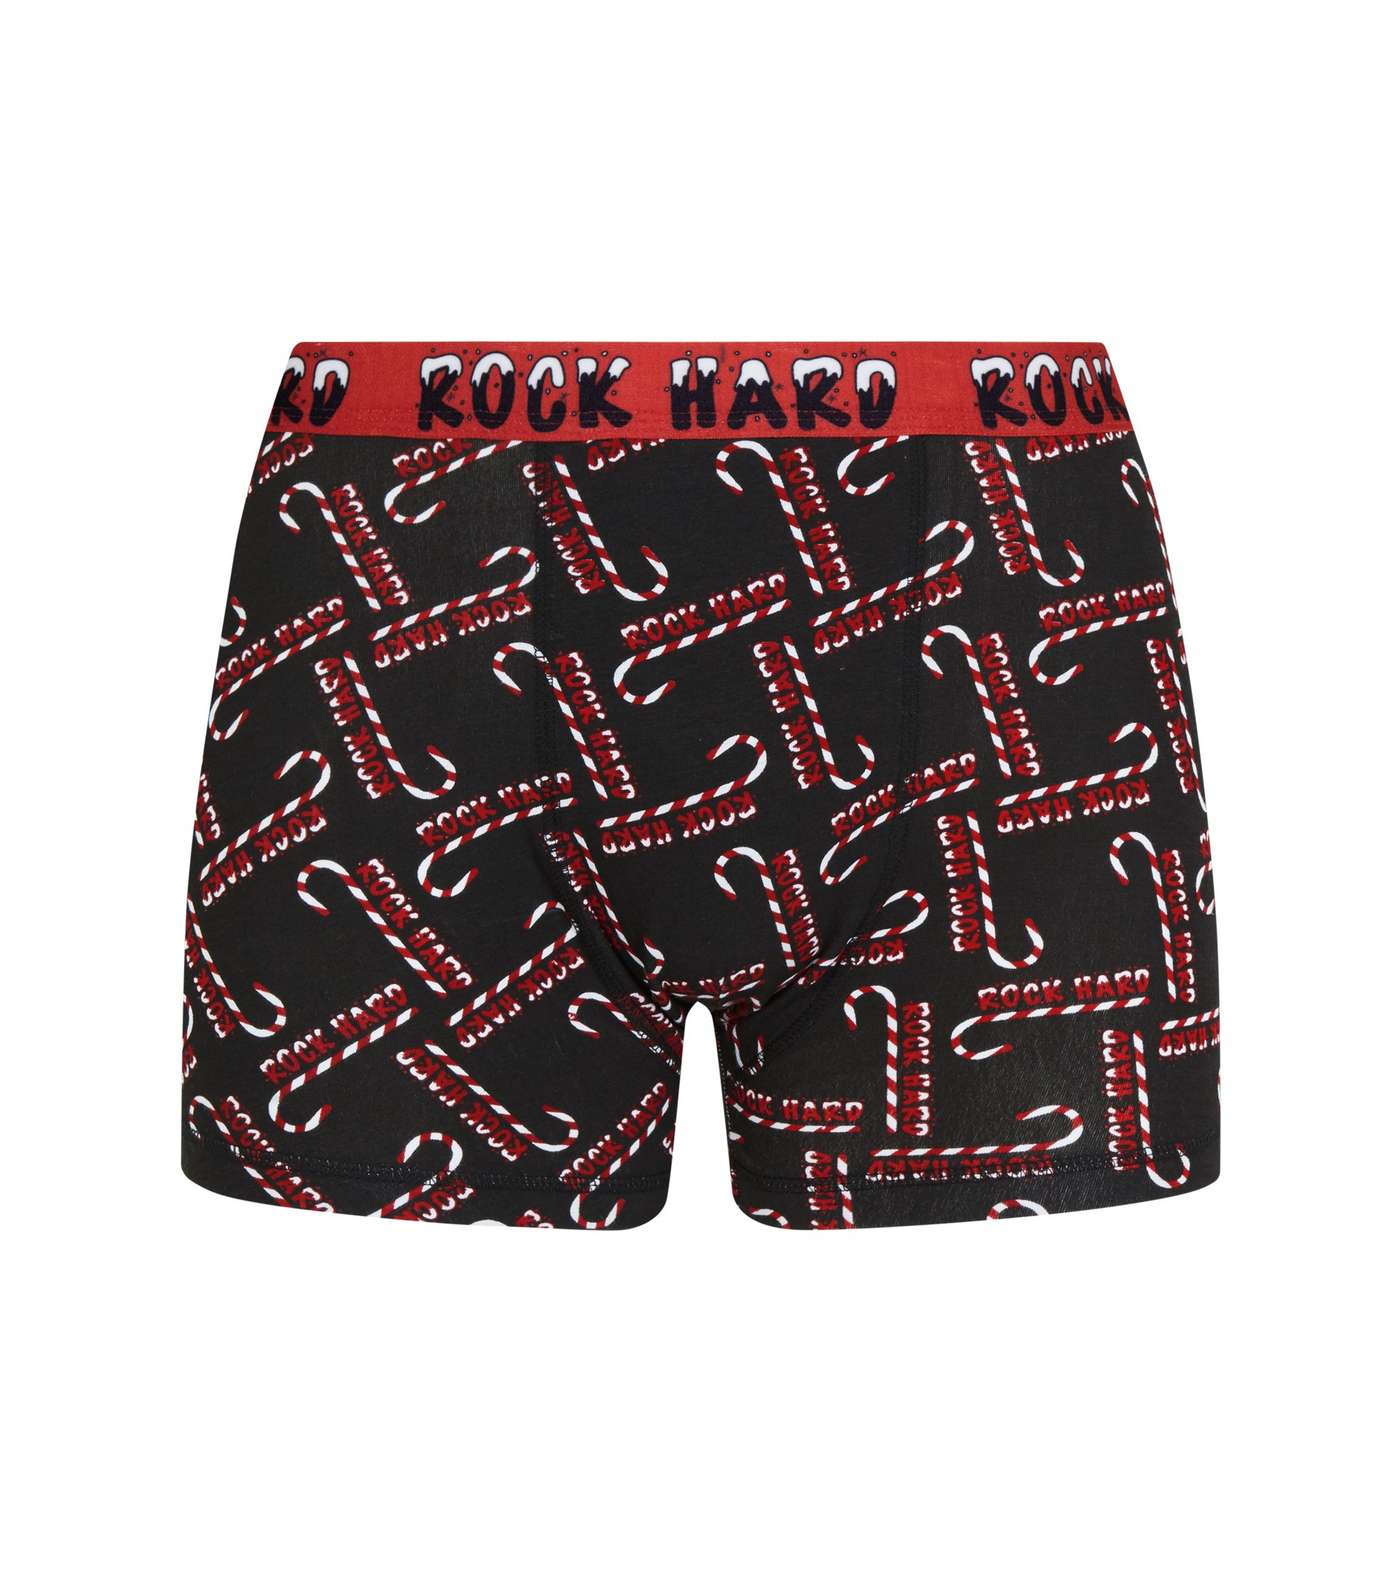 Black Candy Canes 1 Pack Trunks Image 2